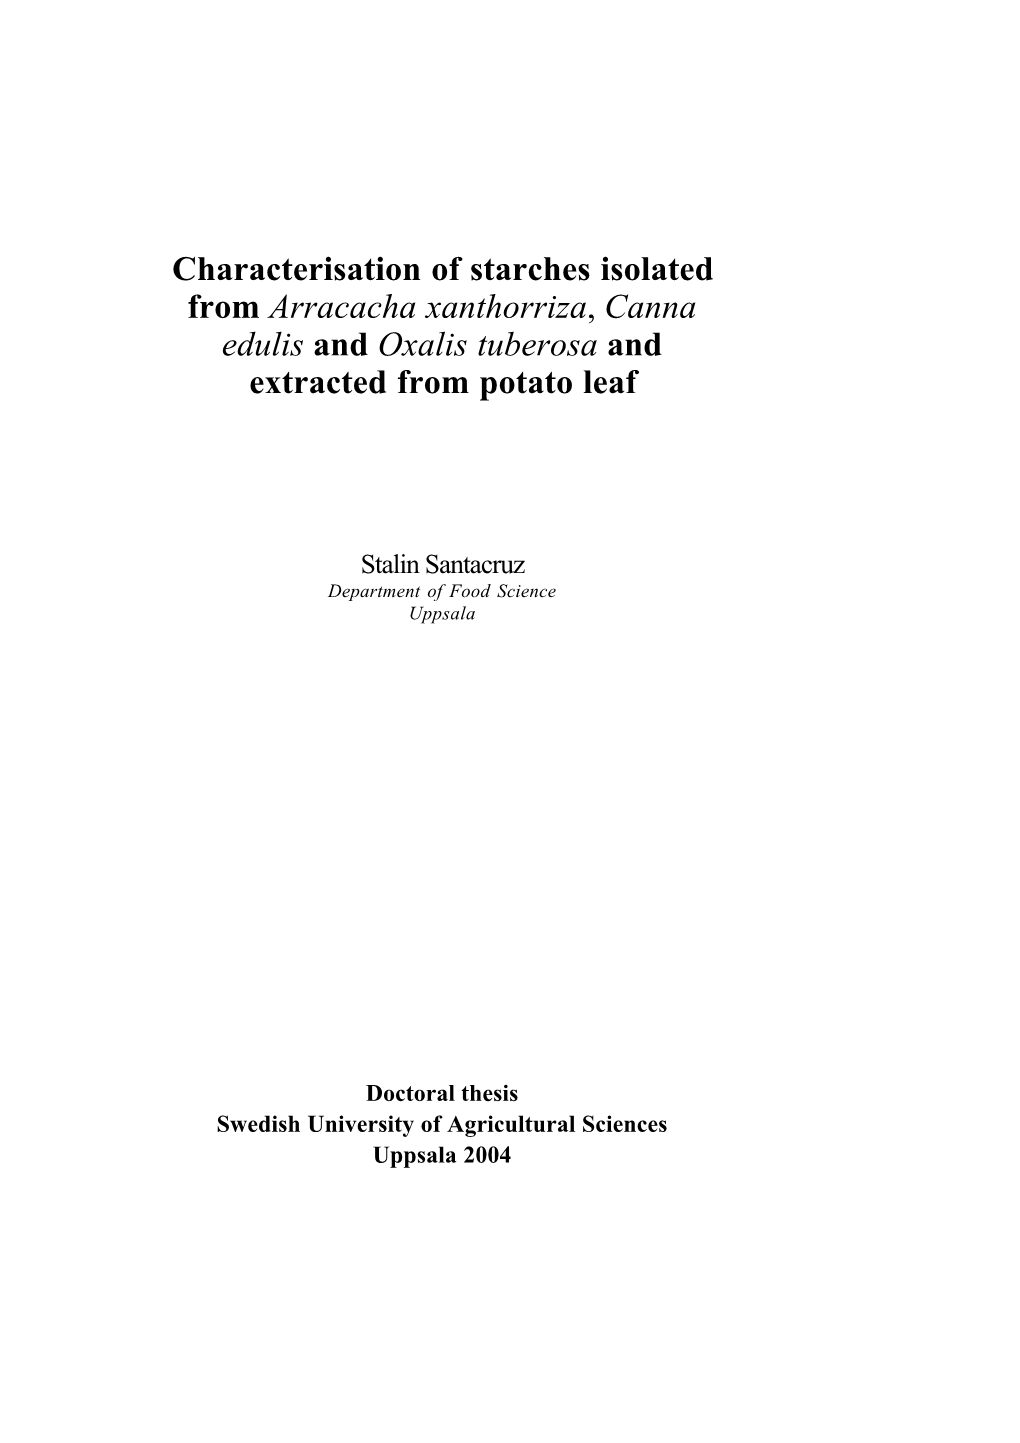 Characterisation of Starches Isolated from Arracacha Xanthorriza, Canna Edulis and Oxalis Tuberosa and Extracted from Potato Leaf